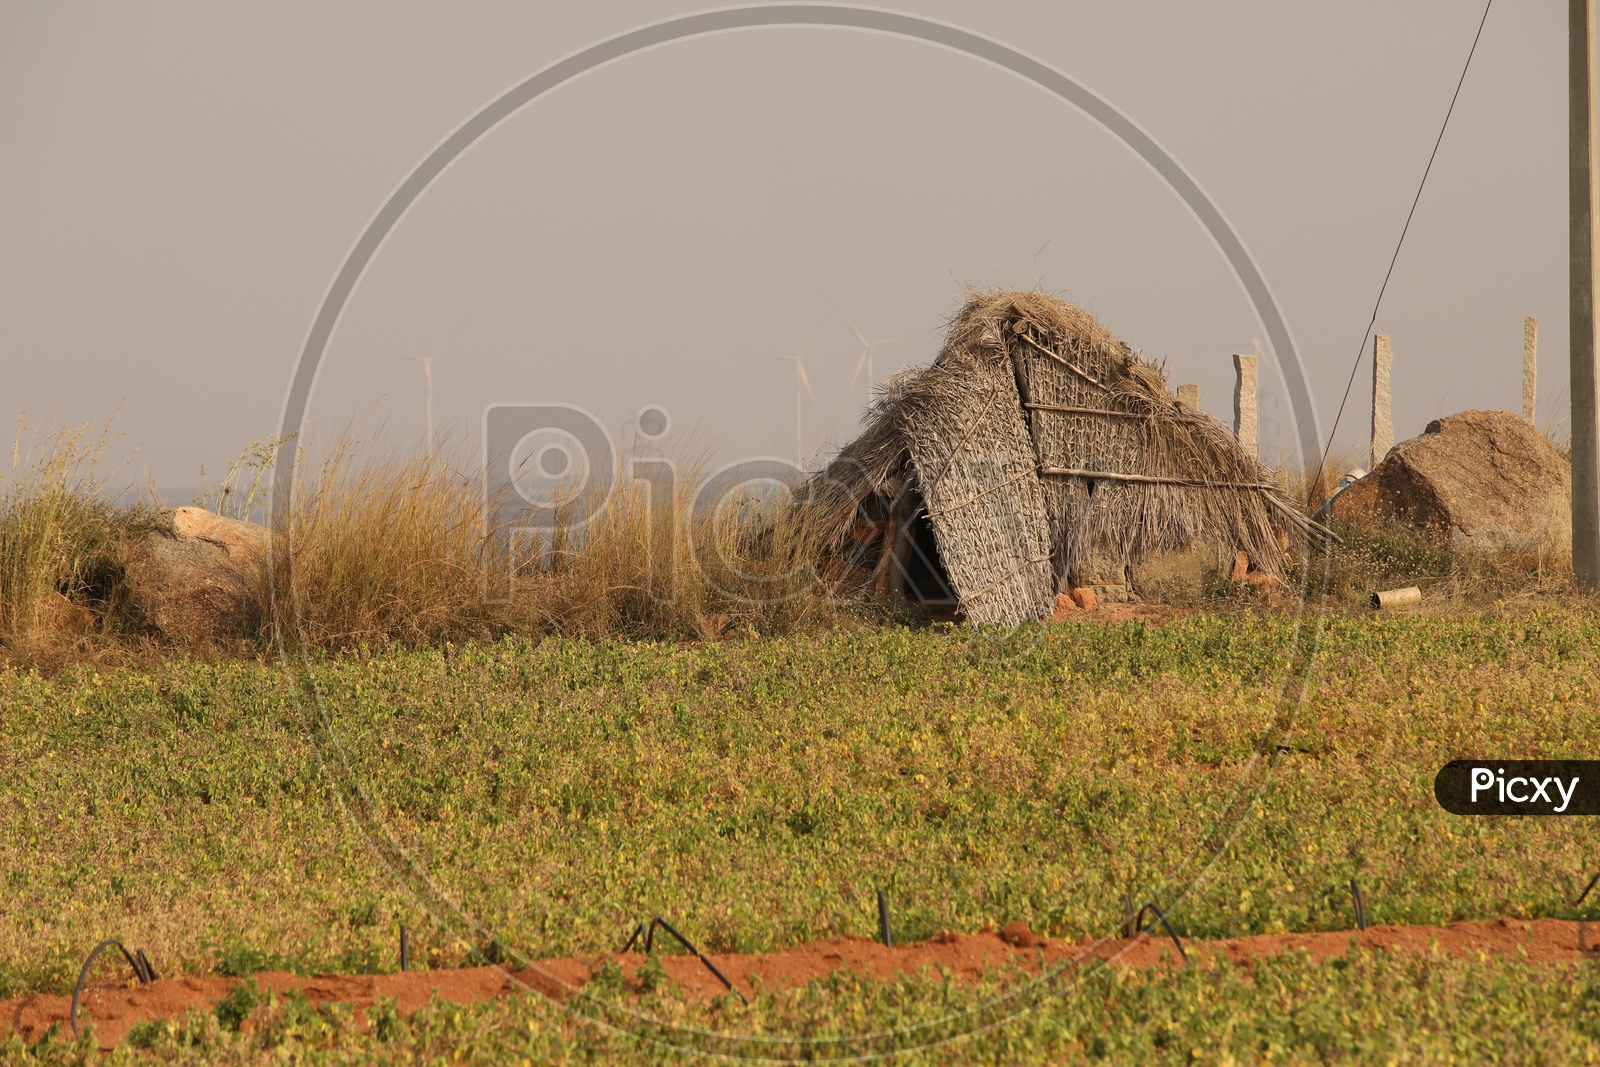 Nipa hut with dry steppe grass in the agriculture fields